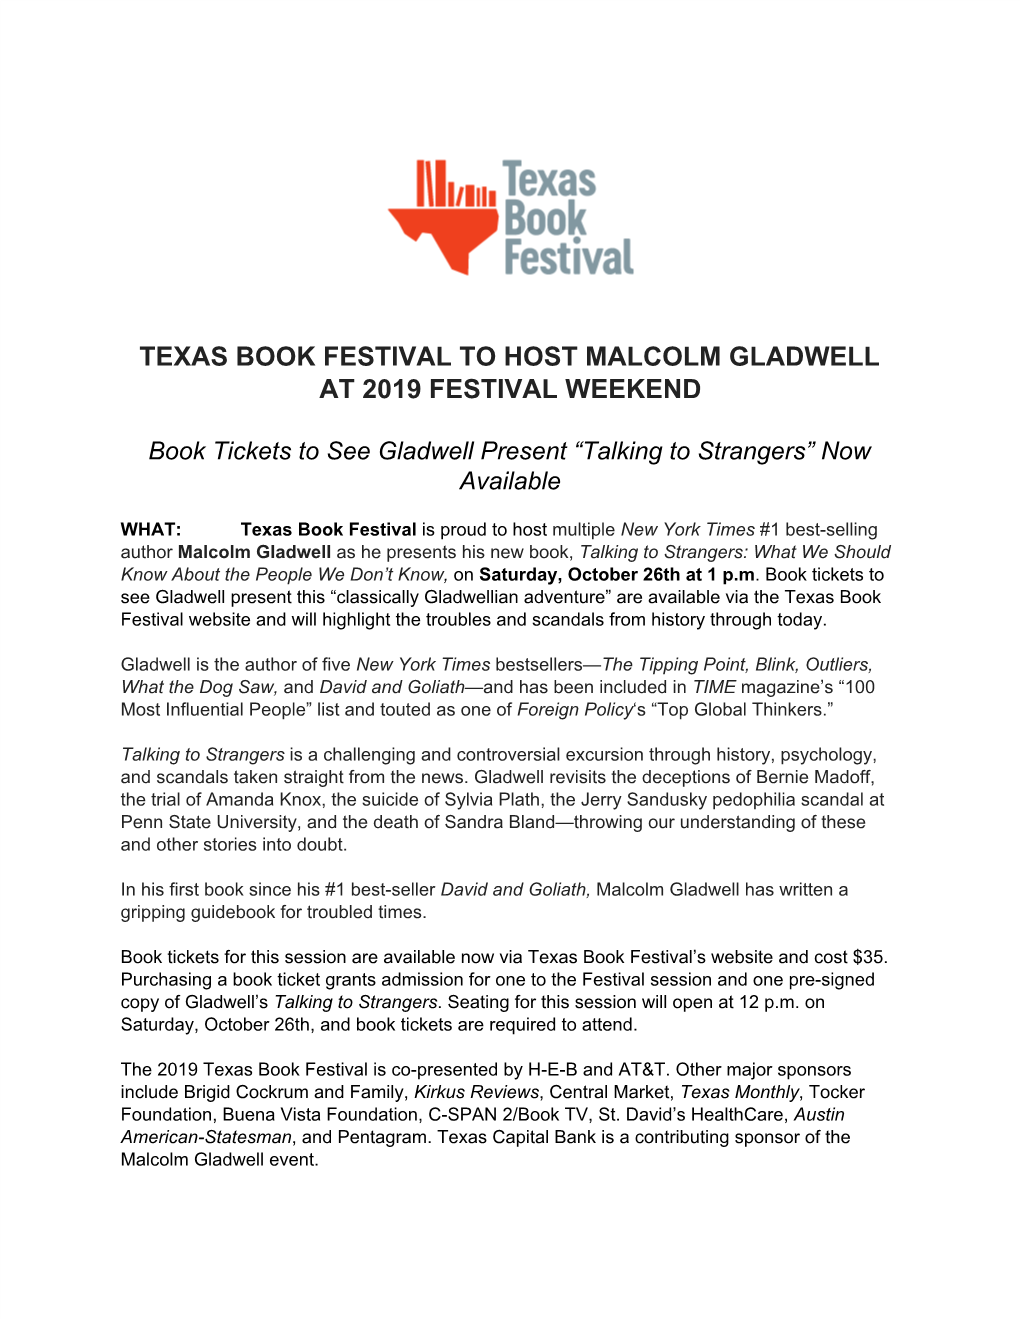 Texas Book Festival to Host Malcolm Gladwell at 2019 Festival Weekend